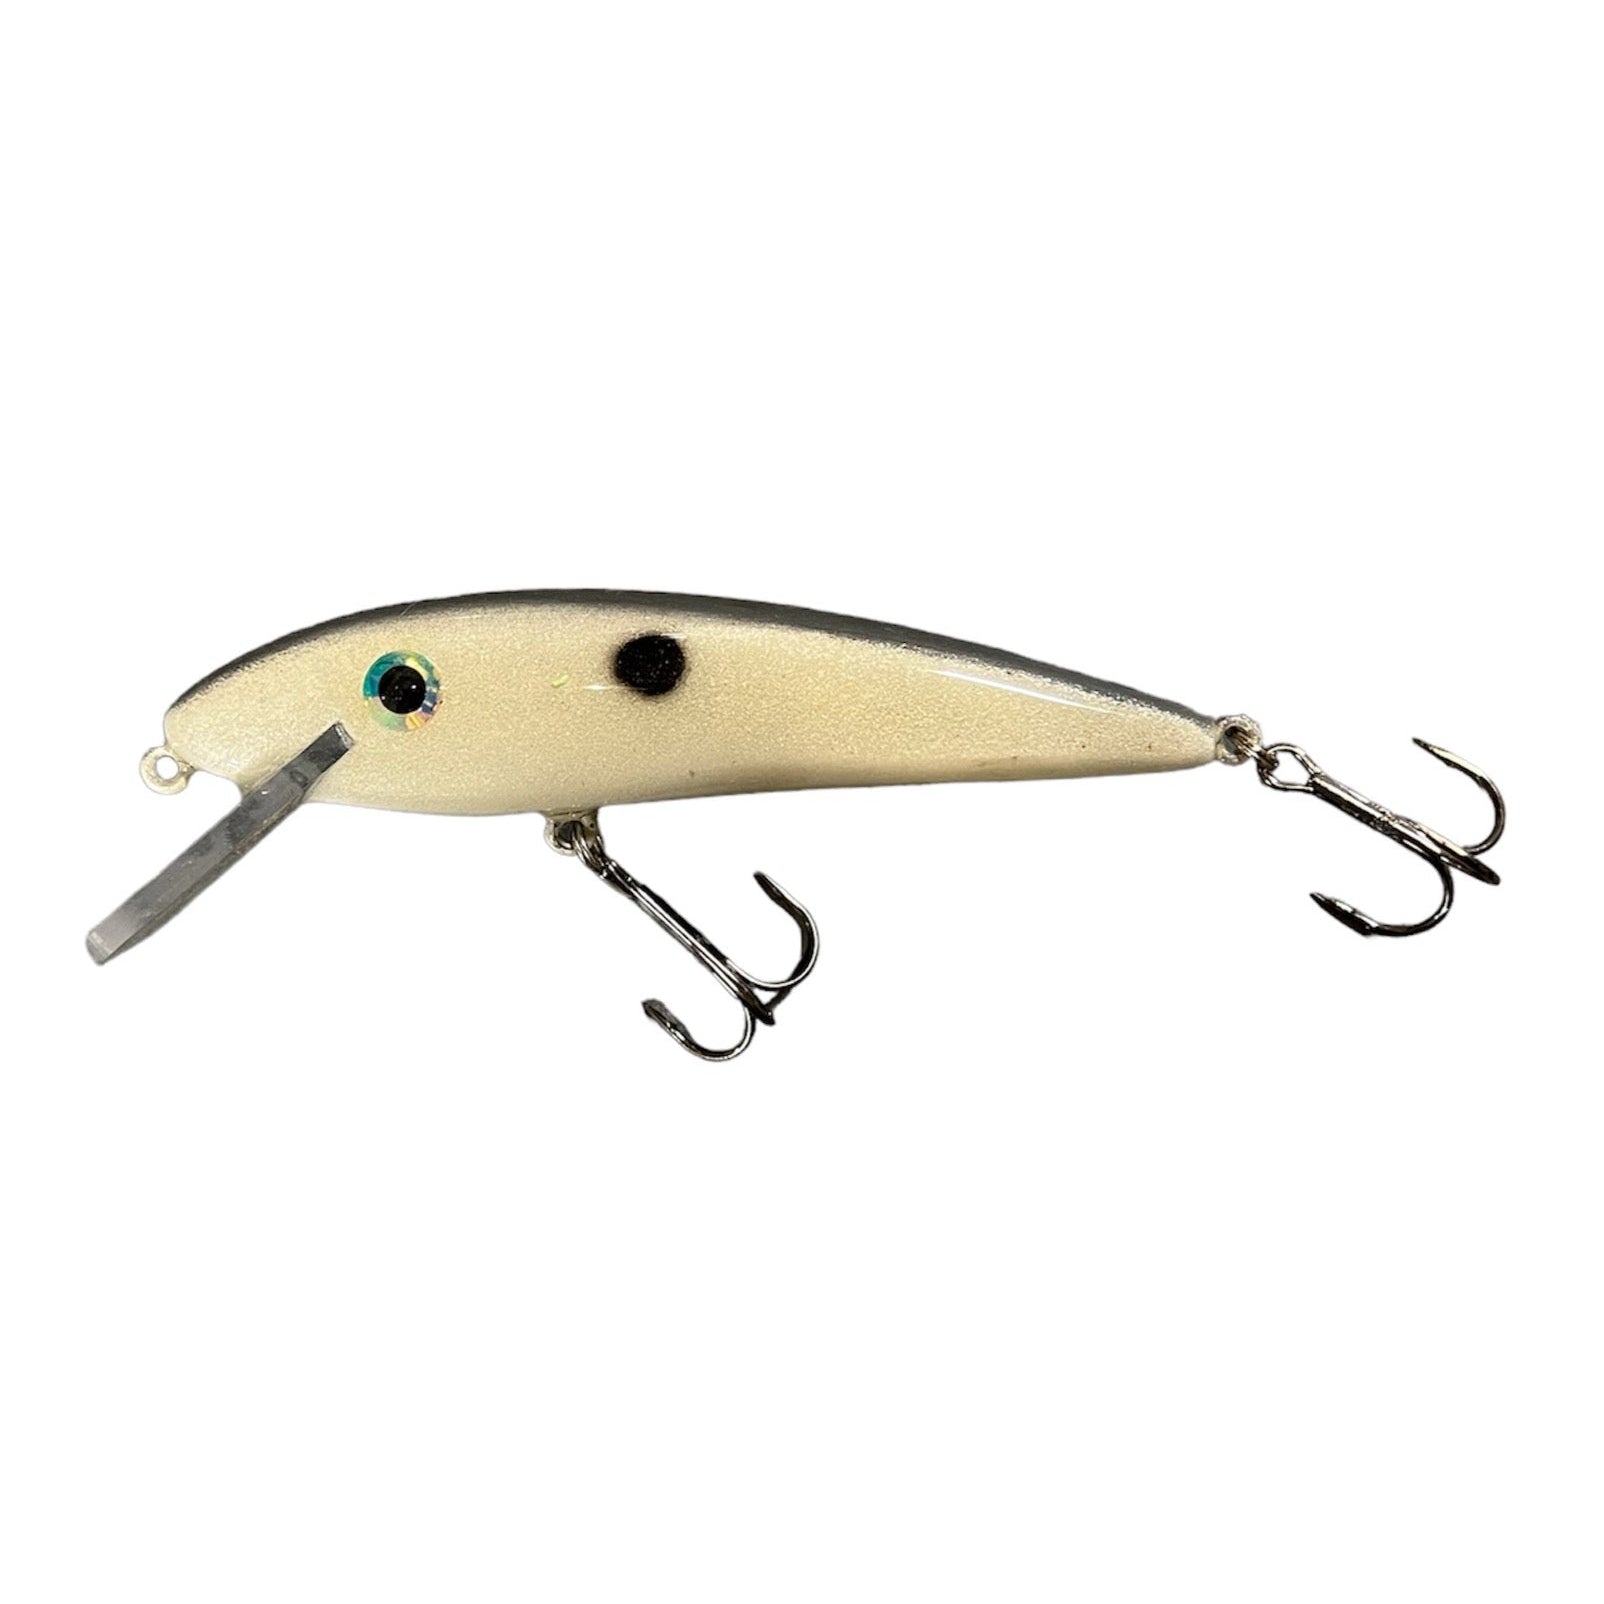 View of Crankbaits Custom X Fury 6.5" Crankbait Shad available at EZOKO Pike and Musky Shop